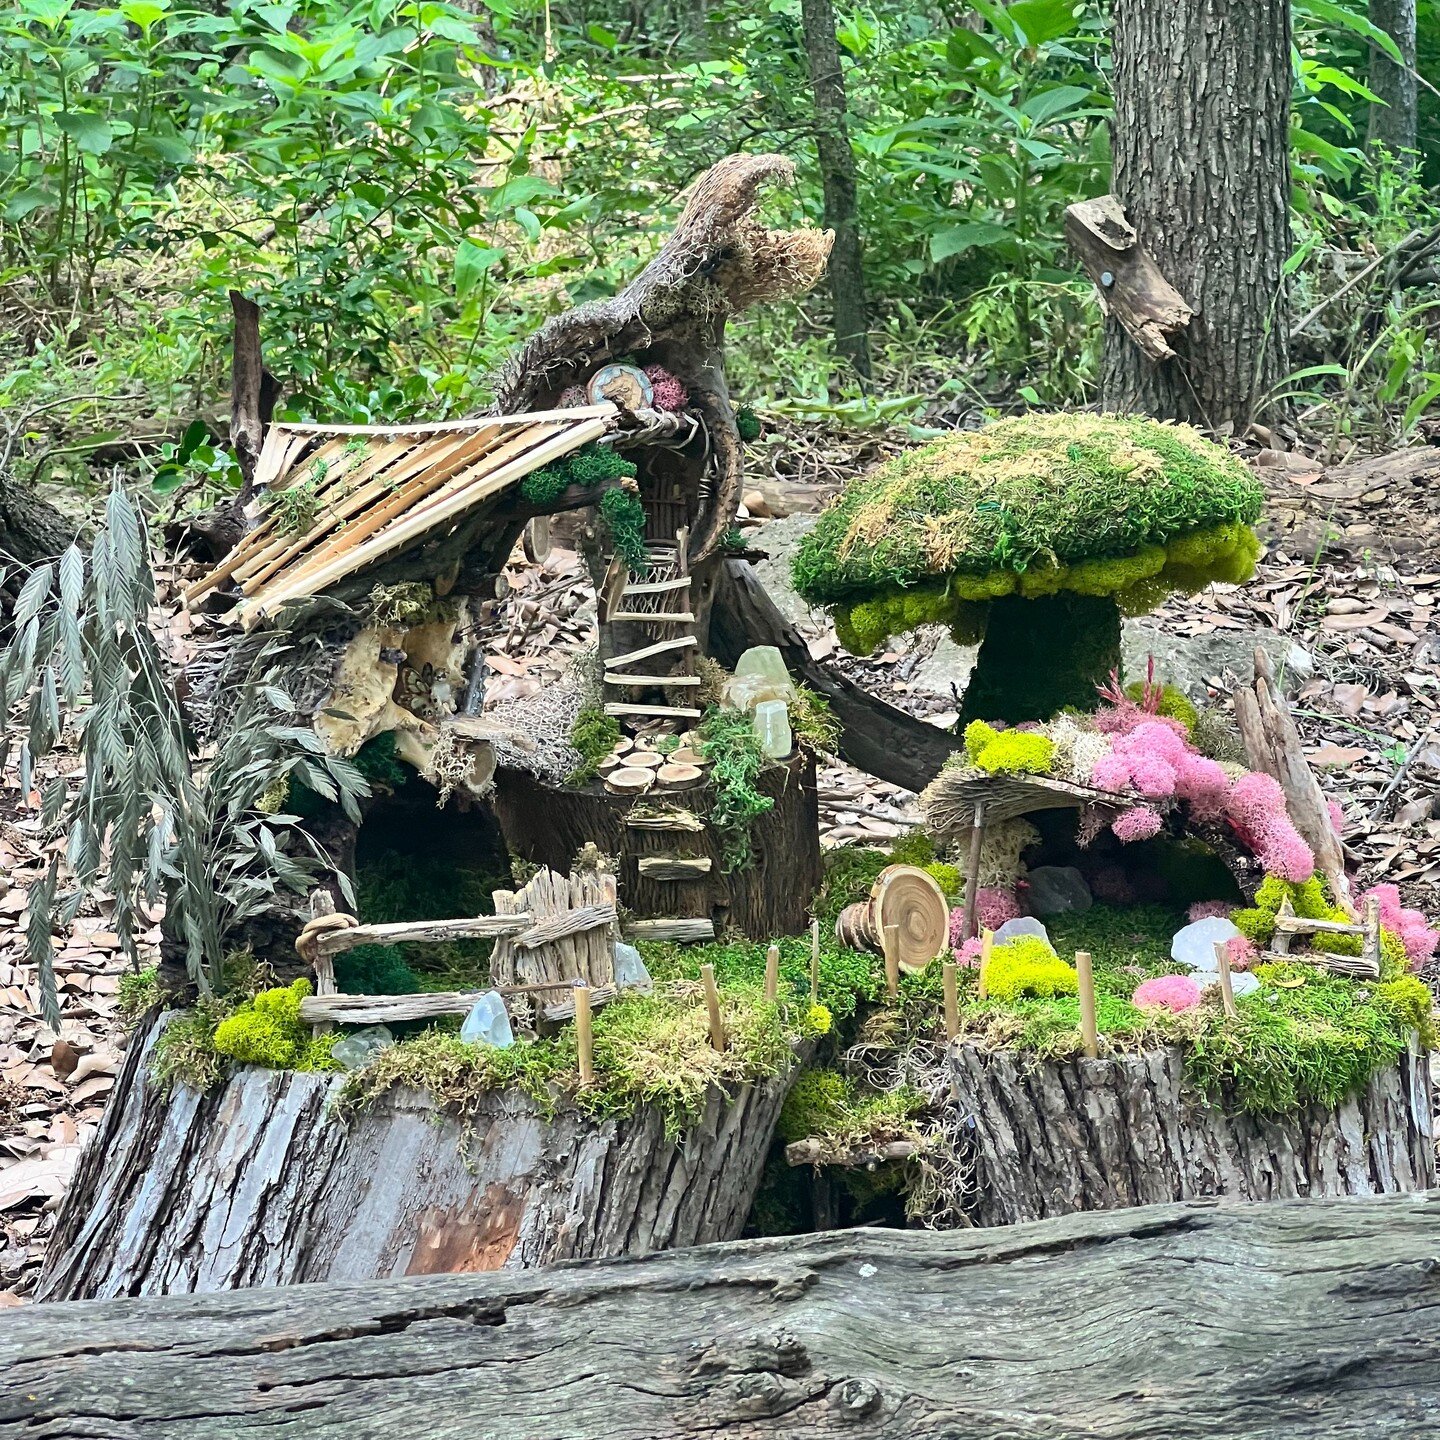 Love is fairy houses. Recently my 21-year-old daughter and I visited a botanic garden exhibiting dozens of fairy houses. The tiny habitats brought back magical memories from her younger years of her own fairy house. 

She loved fairies, and I built h